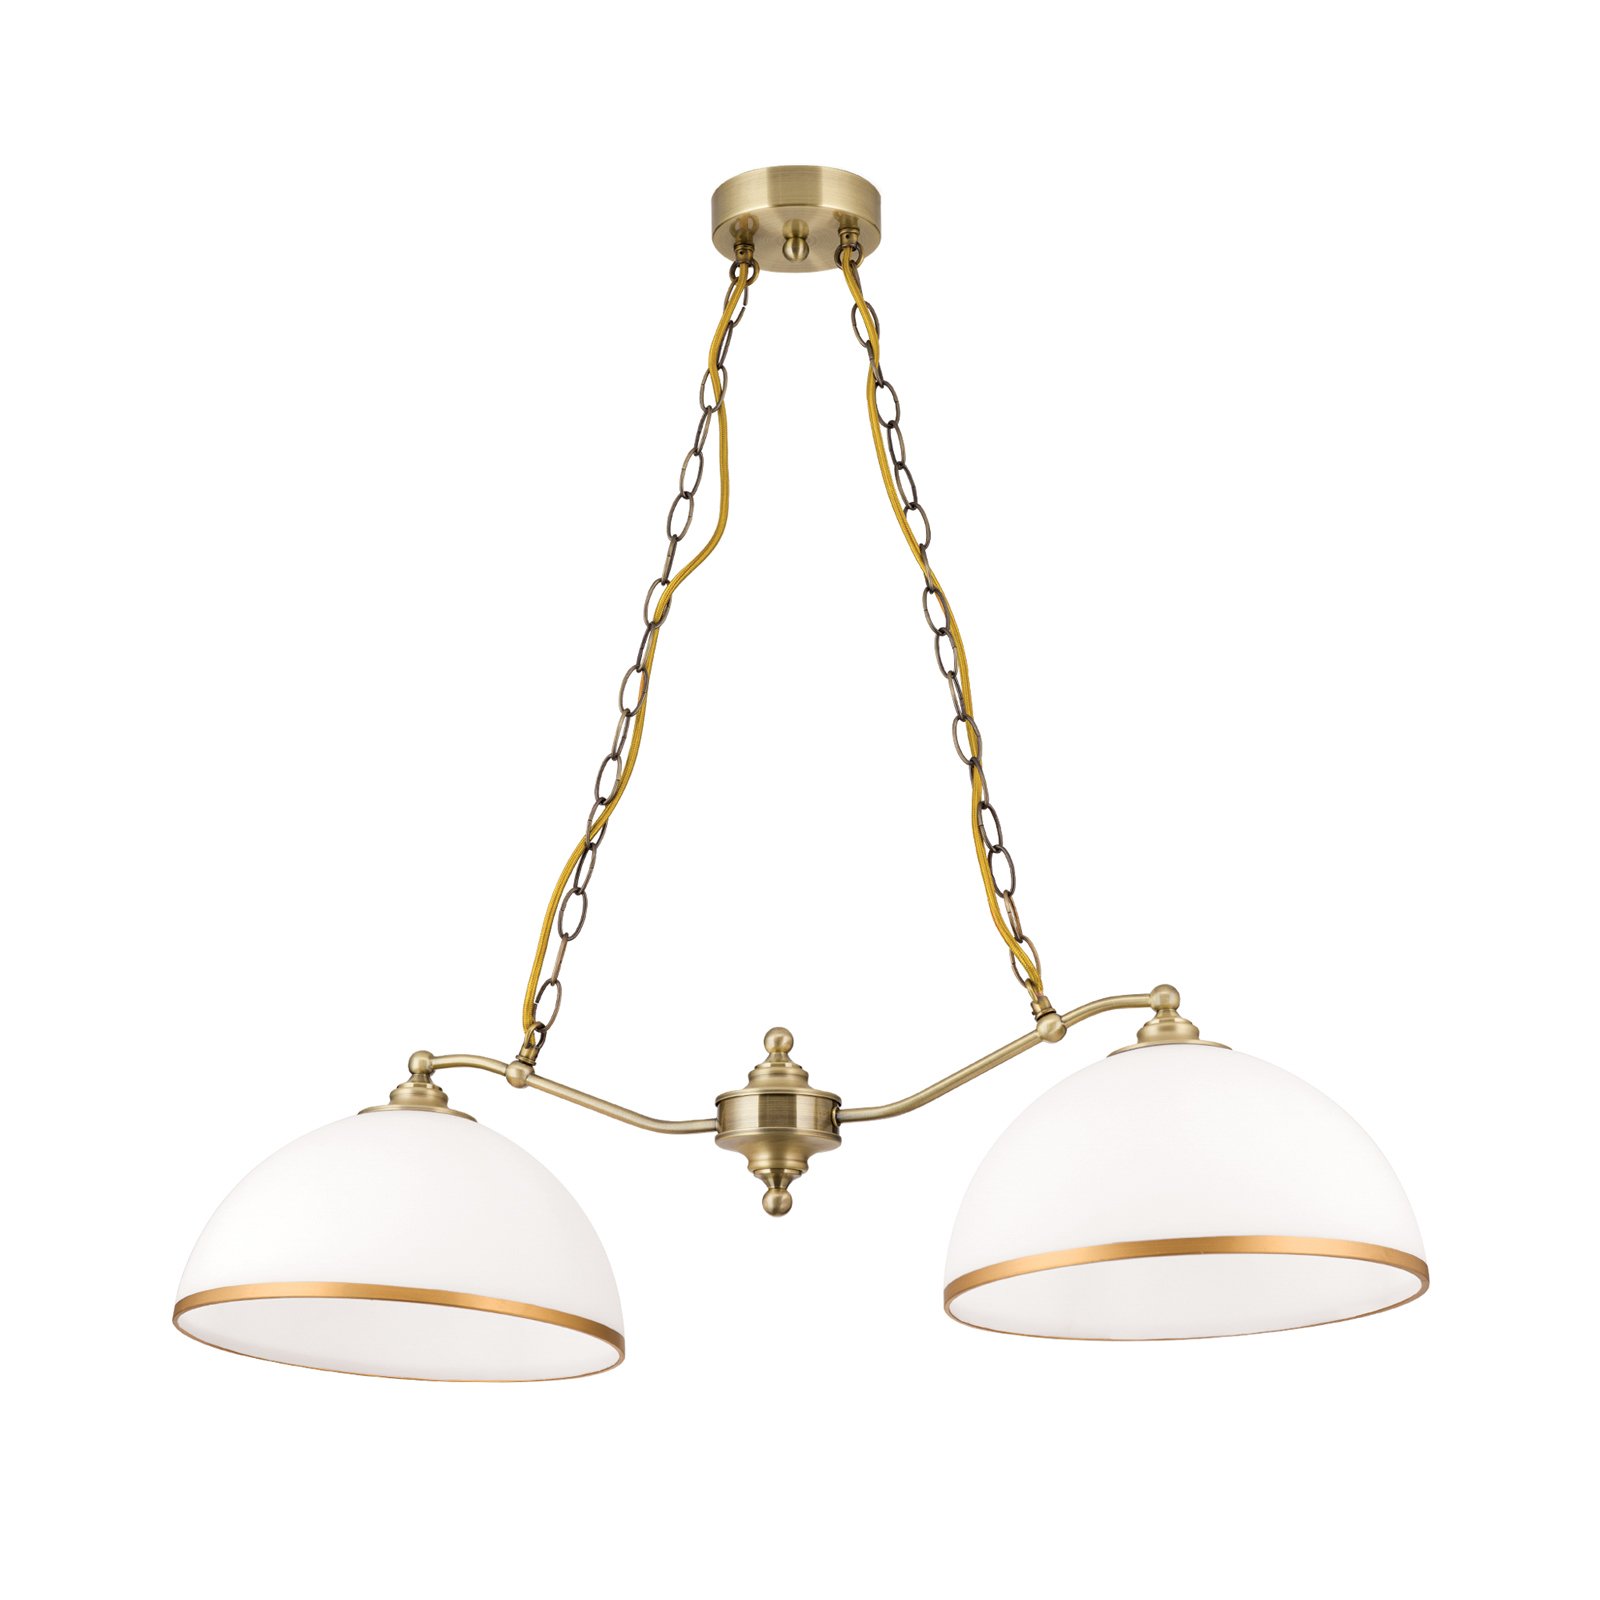 Old Lamp pendant light with a chain, two-bulb